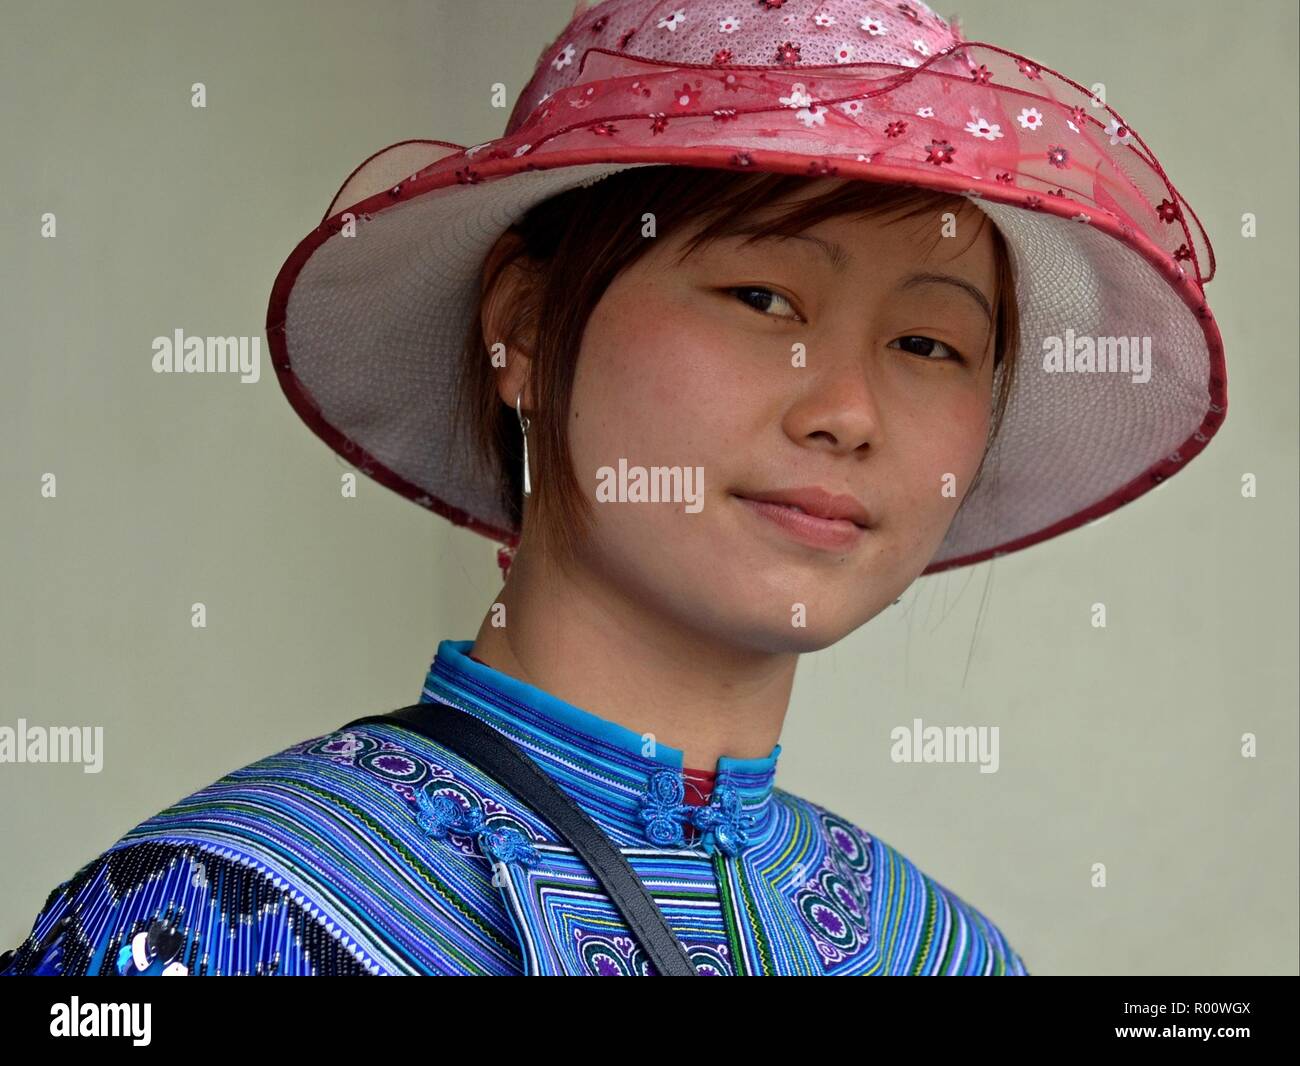 Young Vietnamese H’mong ethnic-minority hill-tribe woman with pink sun hat and embroidered traditional H’mong clothing in blue looks into the camera. Stock Photo